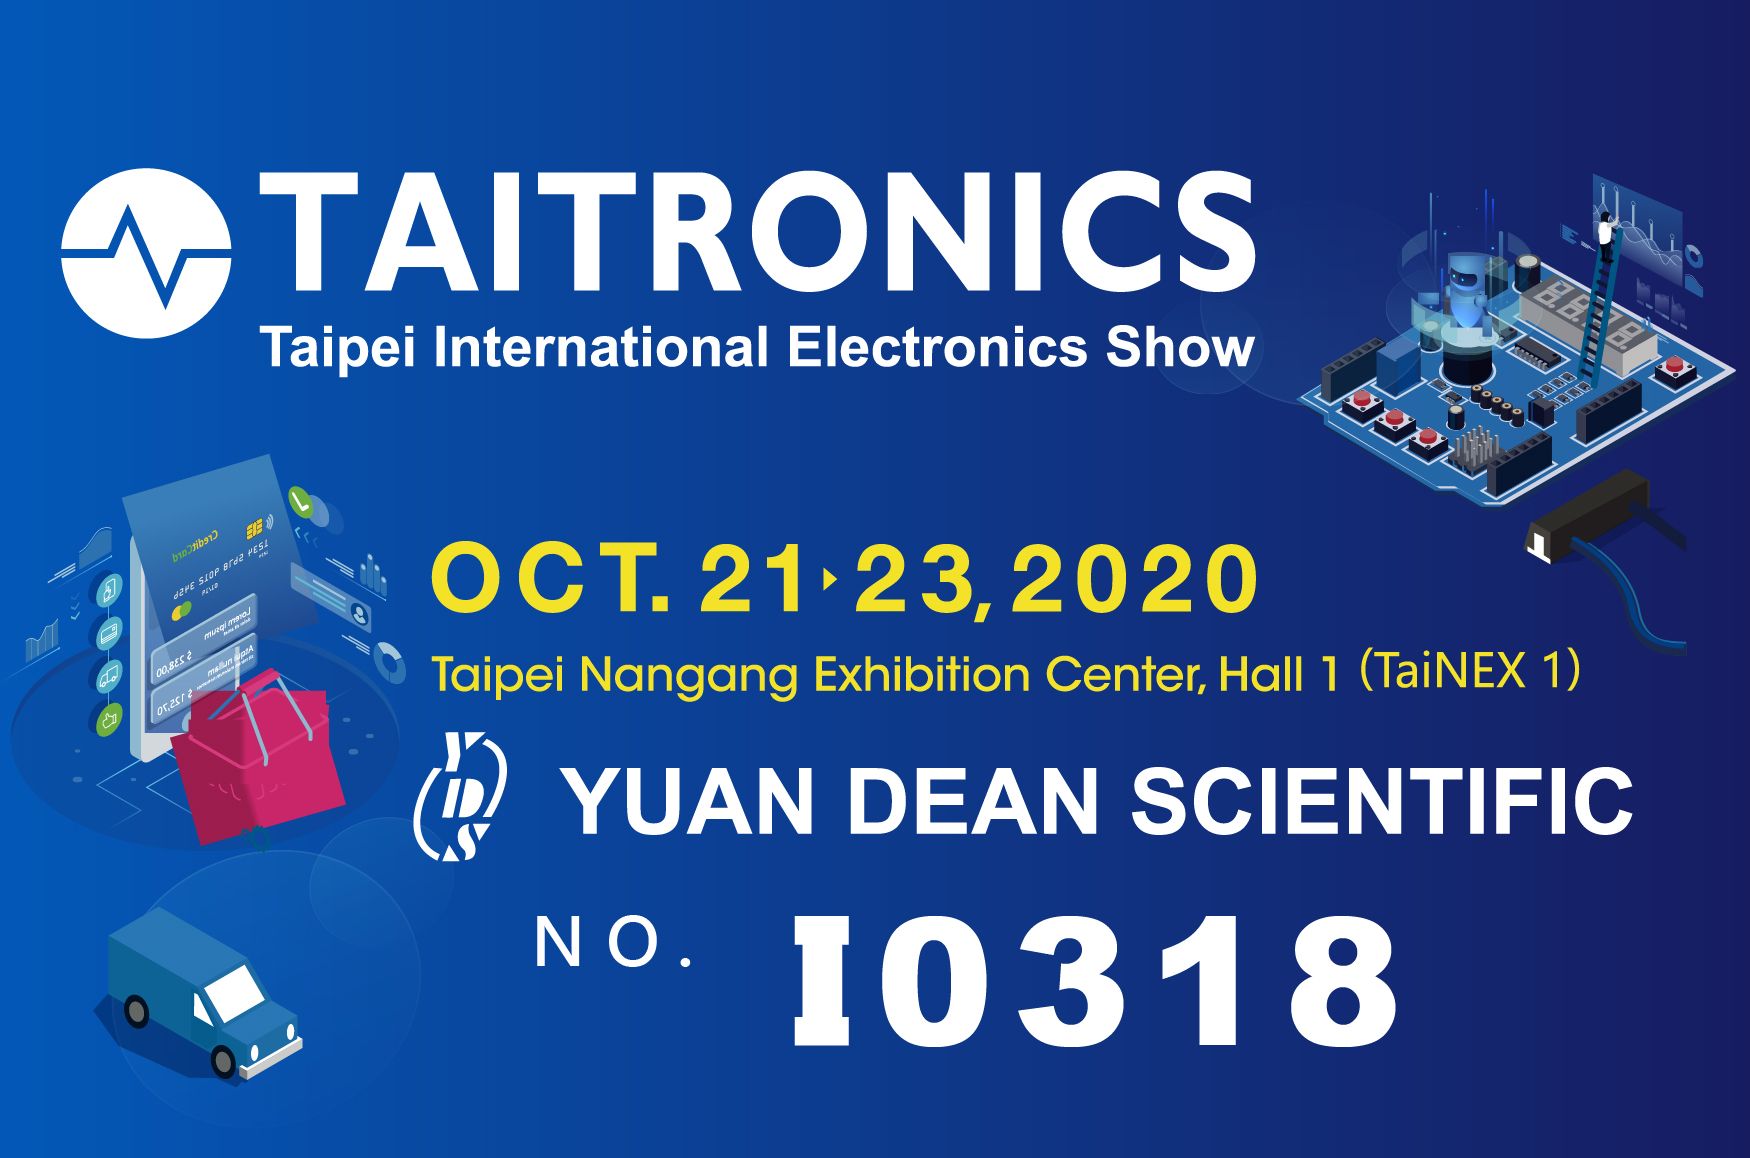 YDS participated in the 2020 TAITRONICS Taipei International Electronics Show